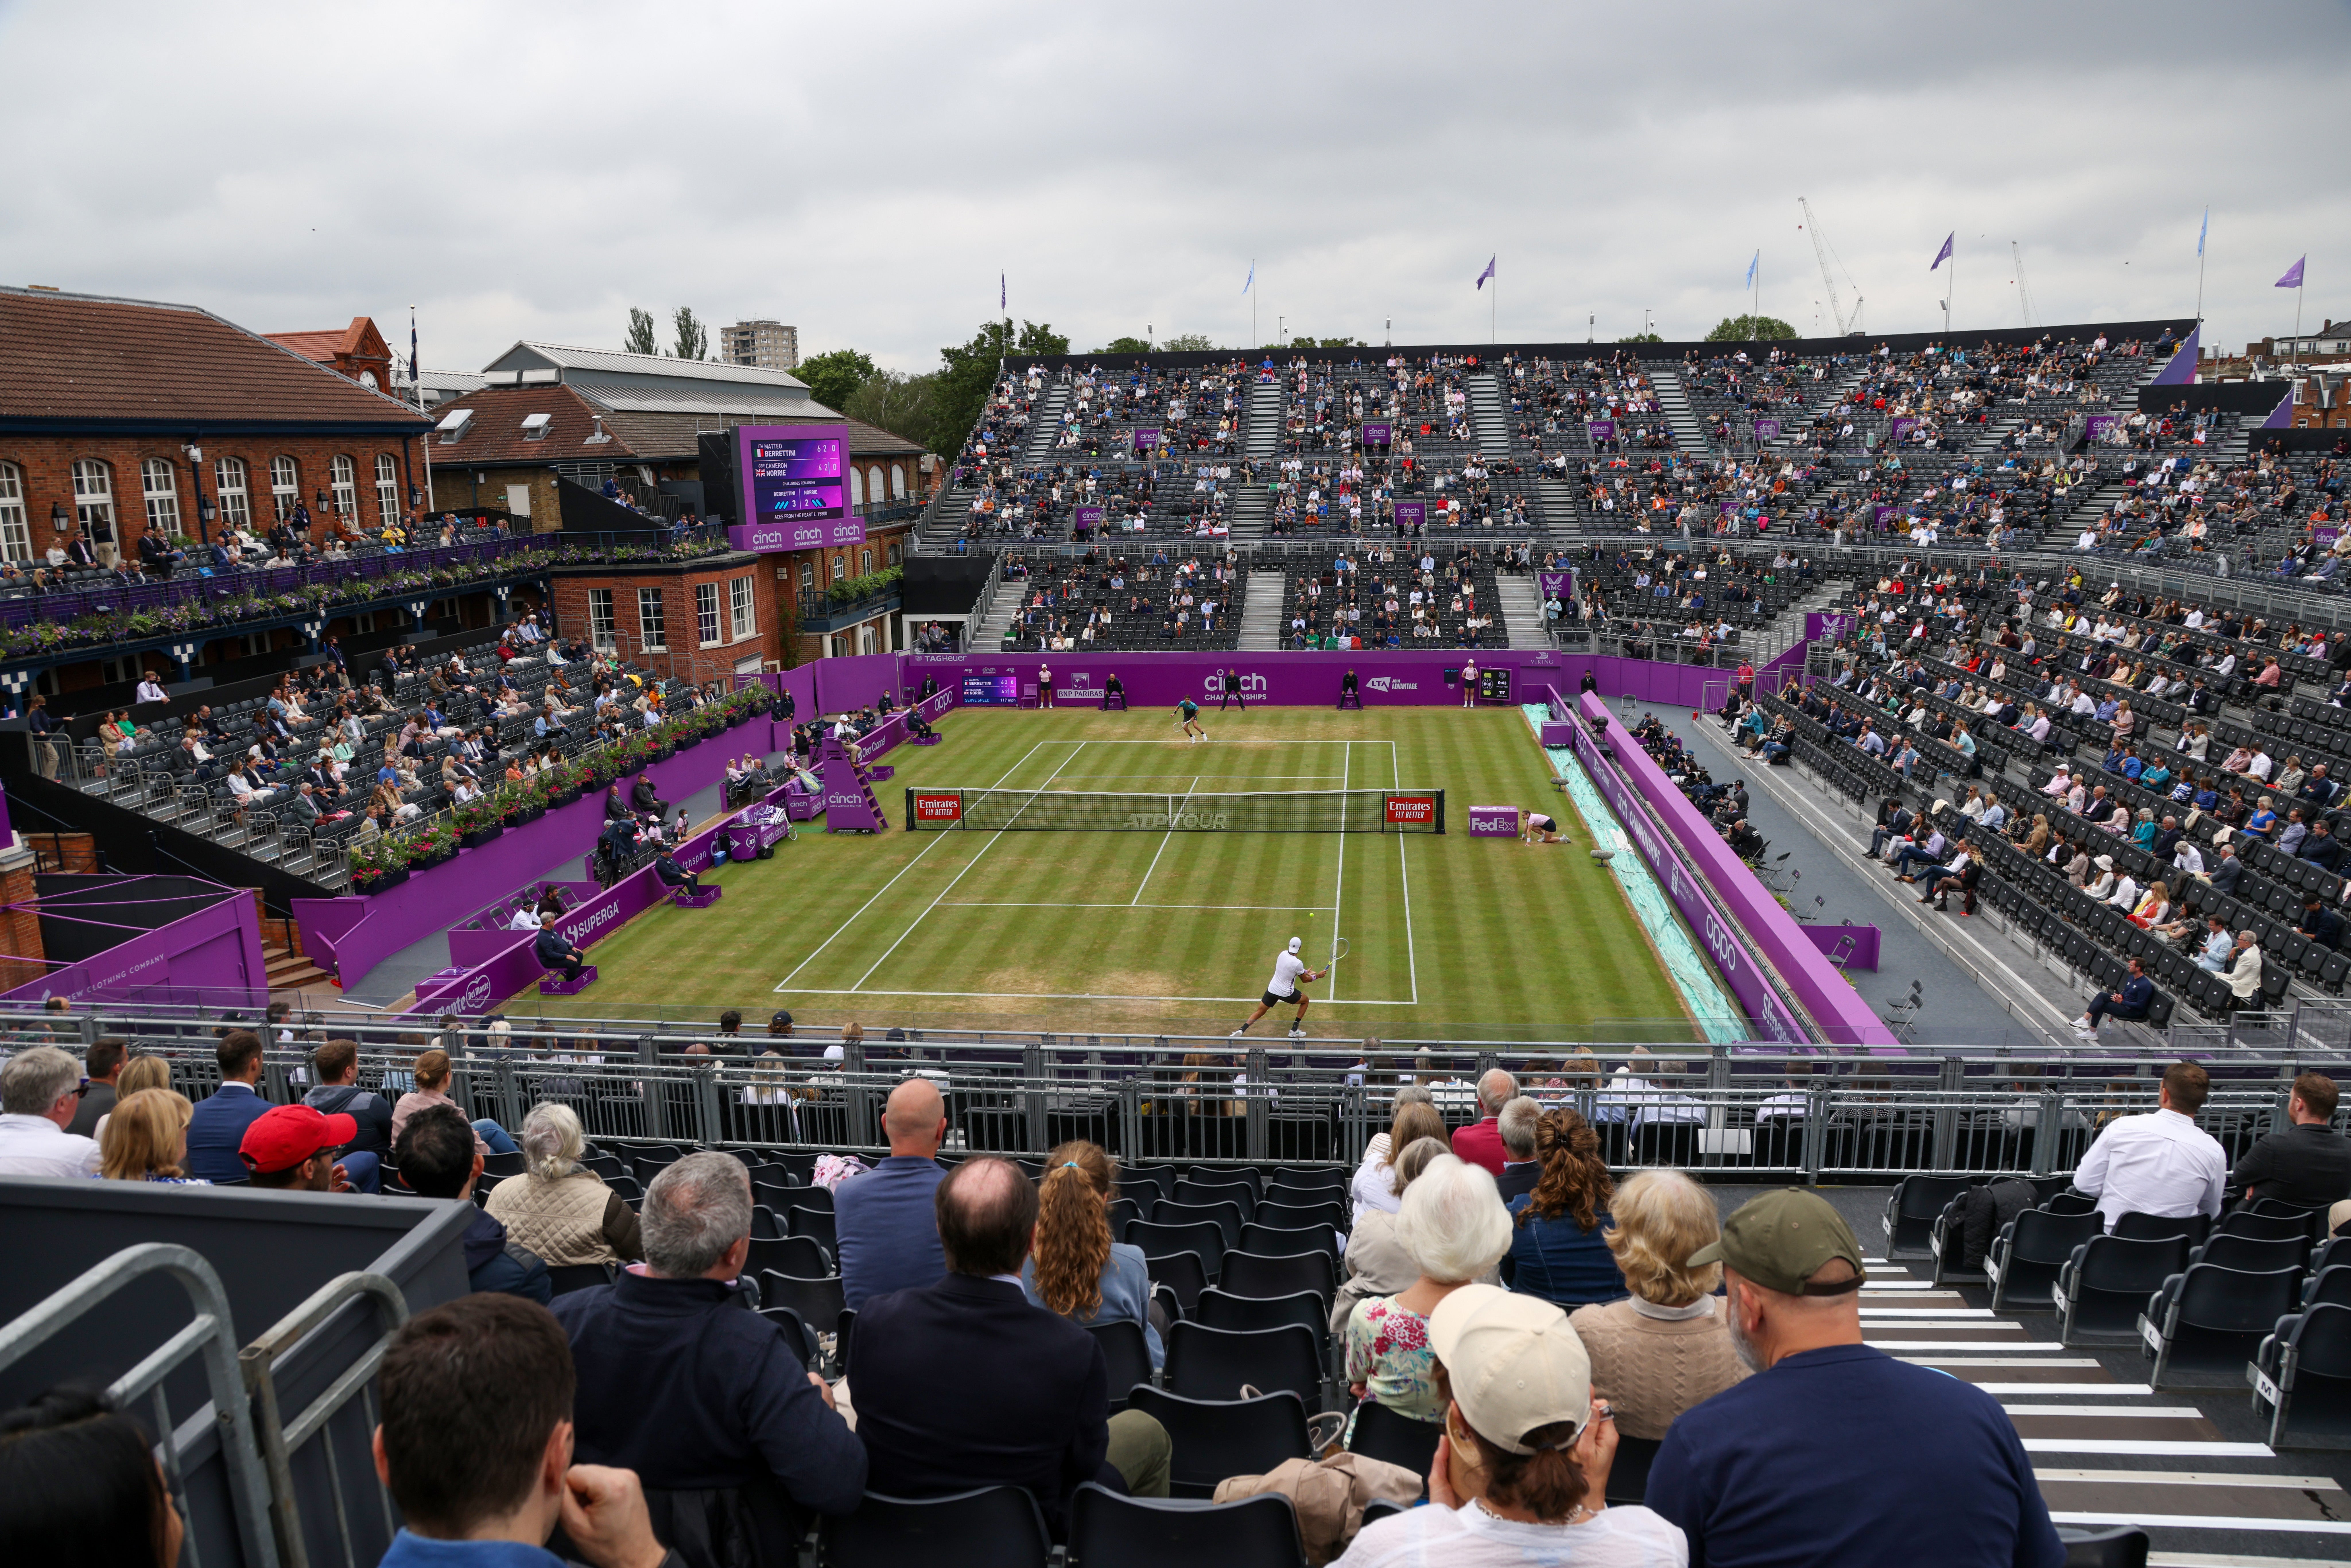 queen's club, atp tour, queen’s to host women’s event from 2025